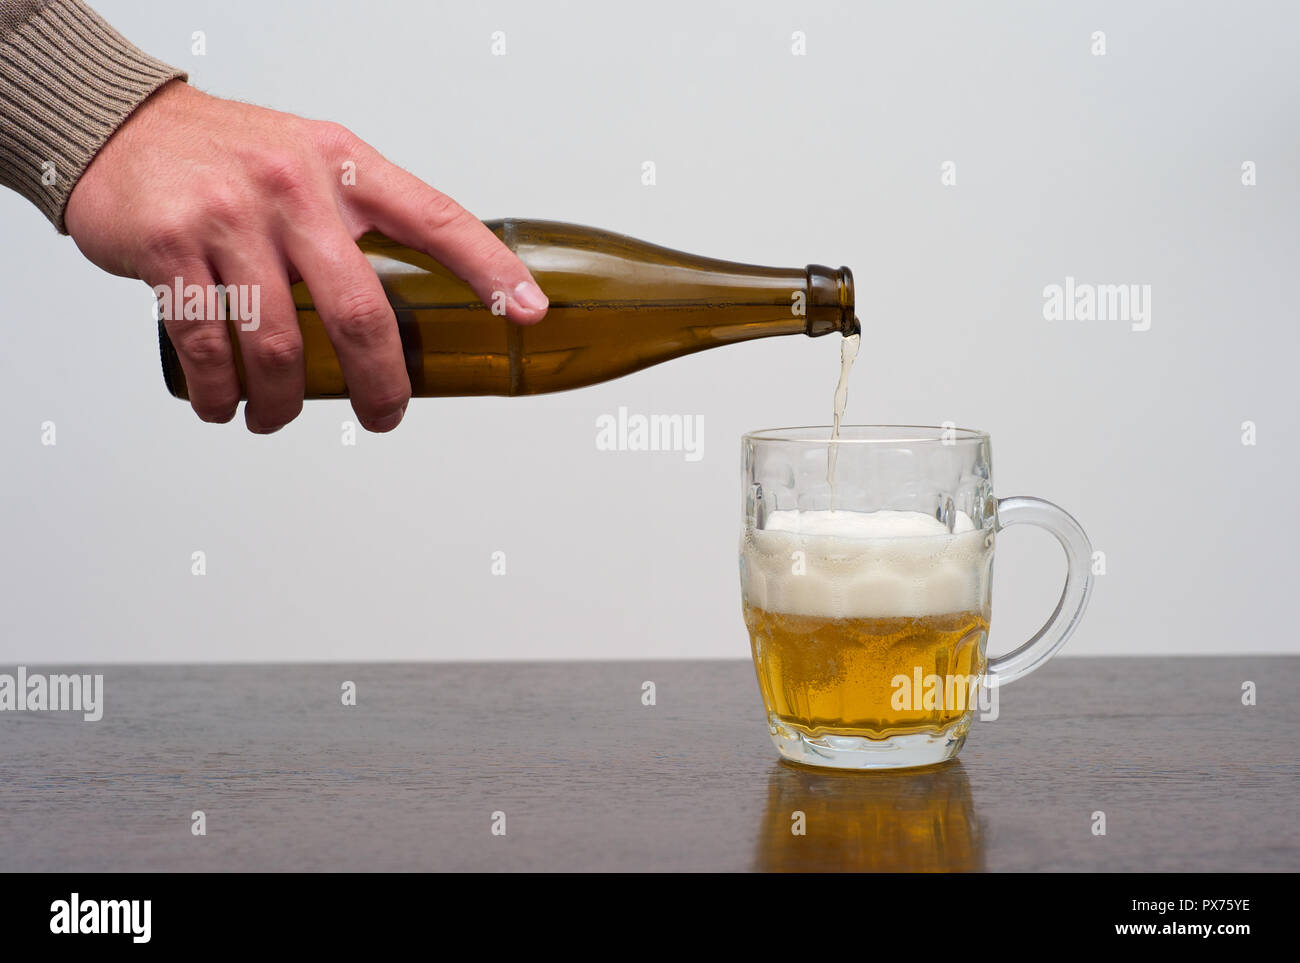 Filling a Dimpled Pint Glass of Beer from the Bottle, Hand Pouring Ale in a Tankard Stock Photo